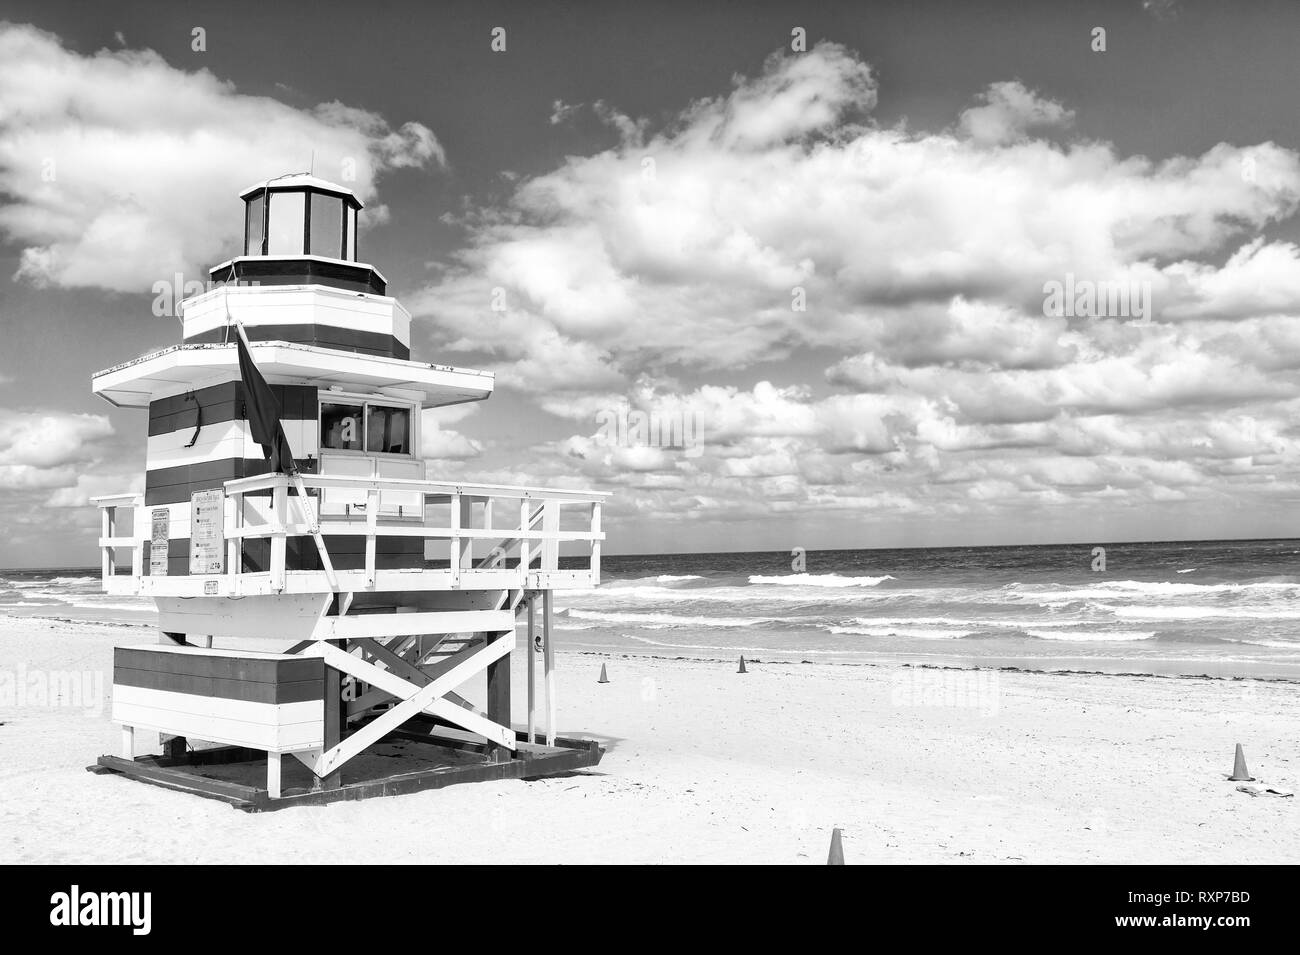 South Beach, Miami, Florida, lifeguard house in a colorful Art Deco style on cloudy blue sky and Atlantic Ocean in background, world famous travel location Stock Photo